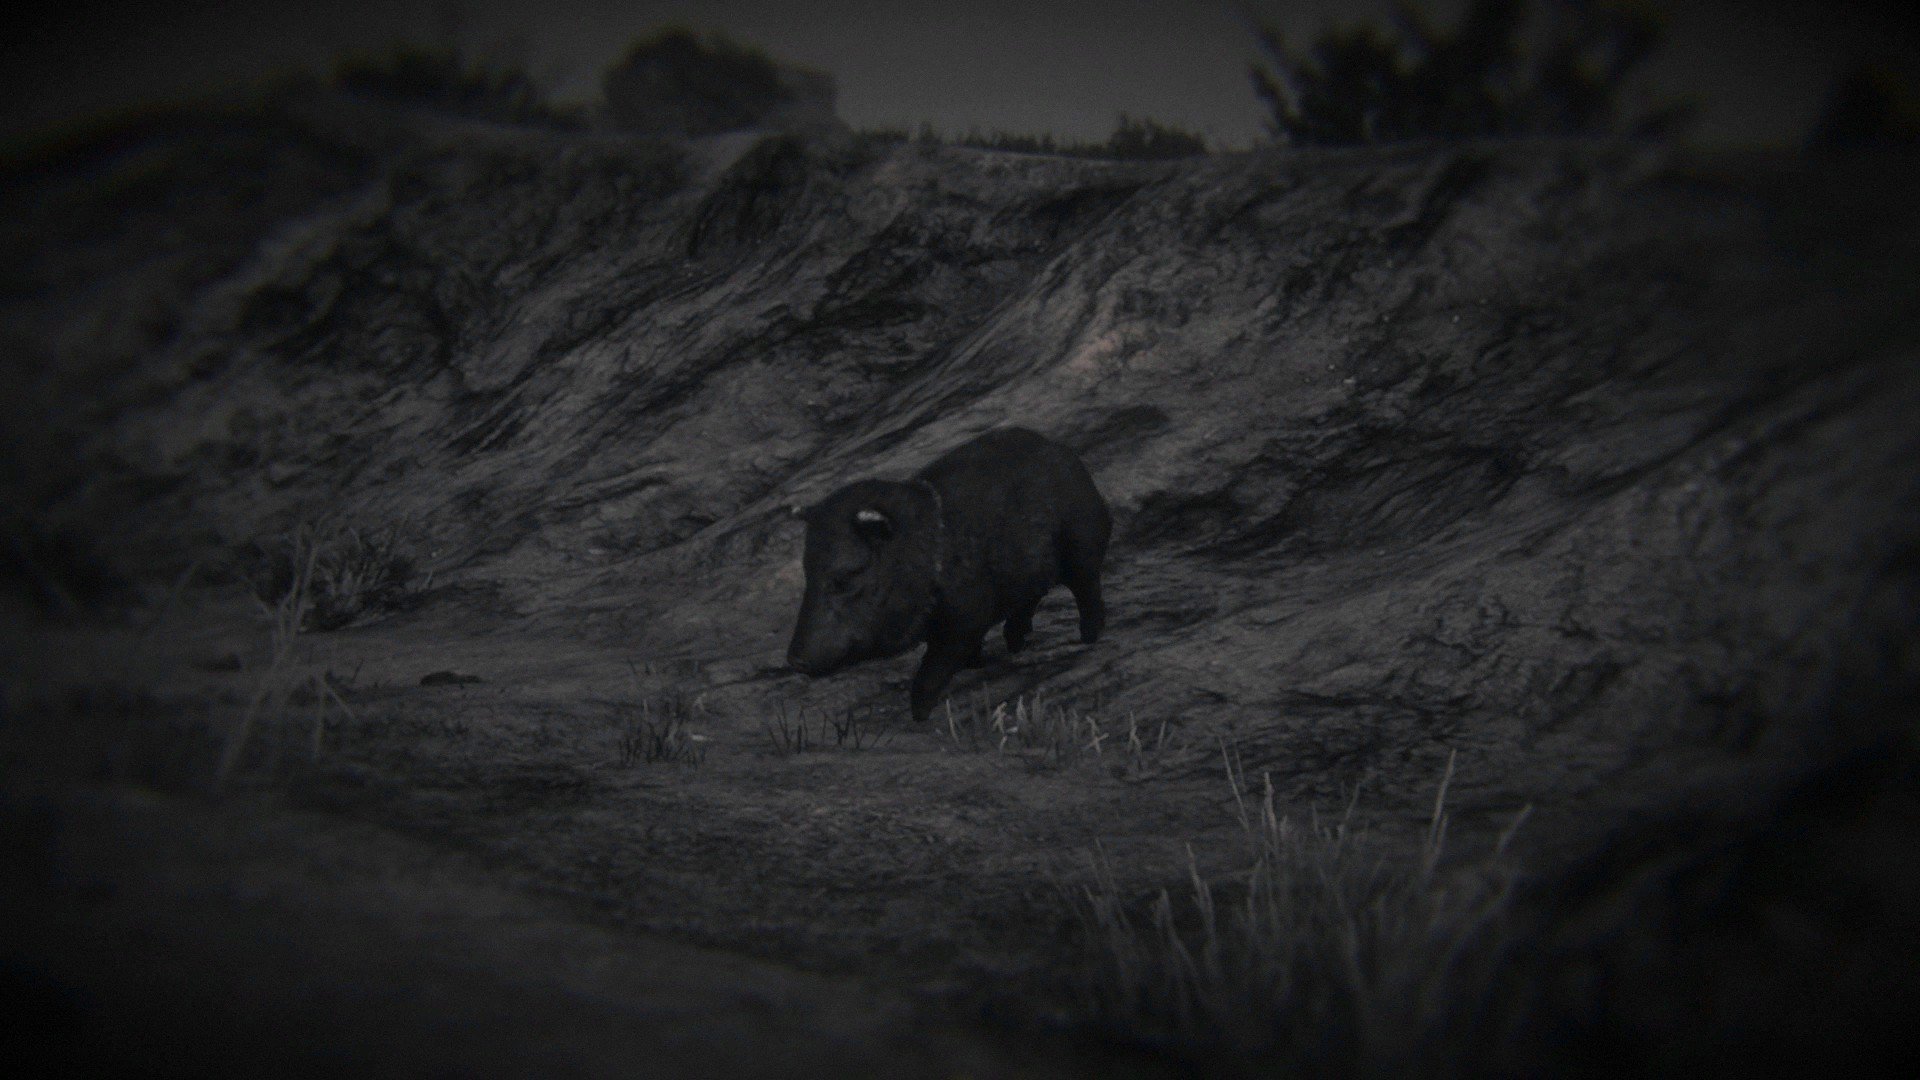 Collared peccary at night